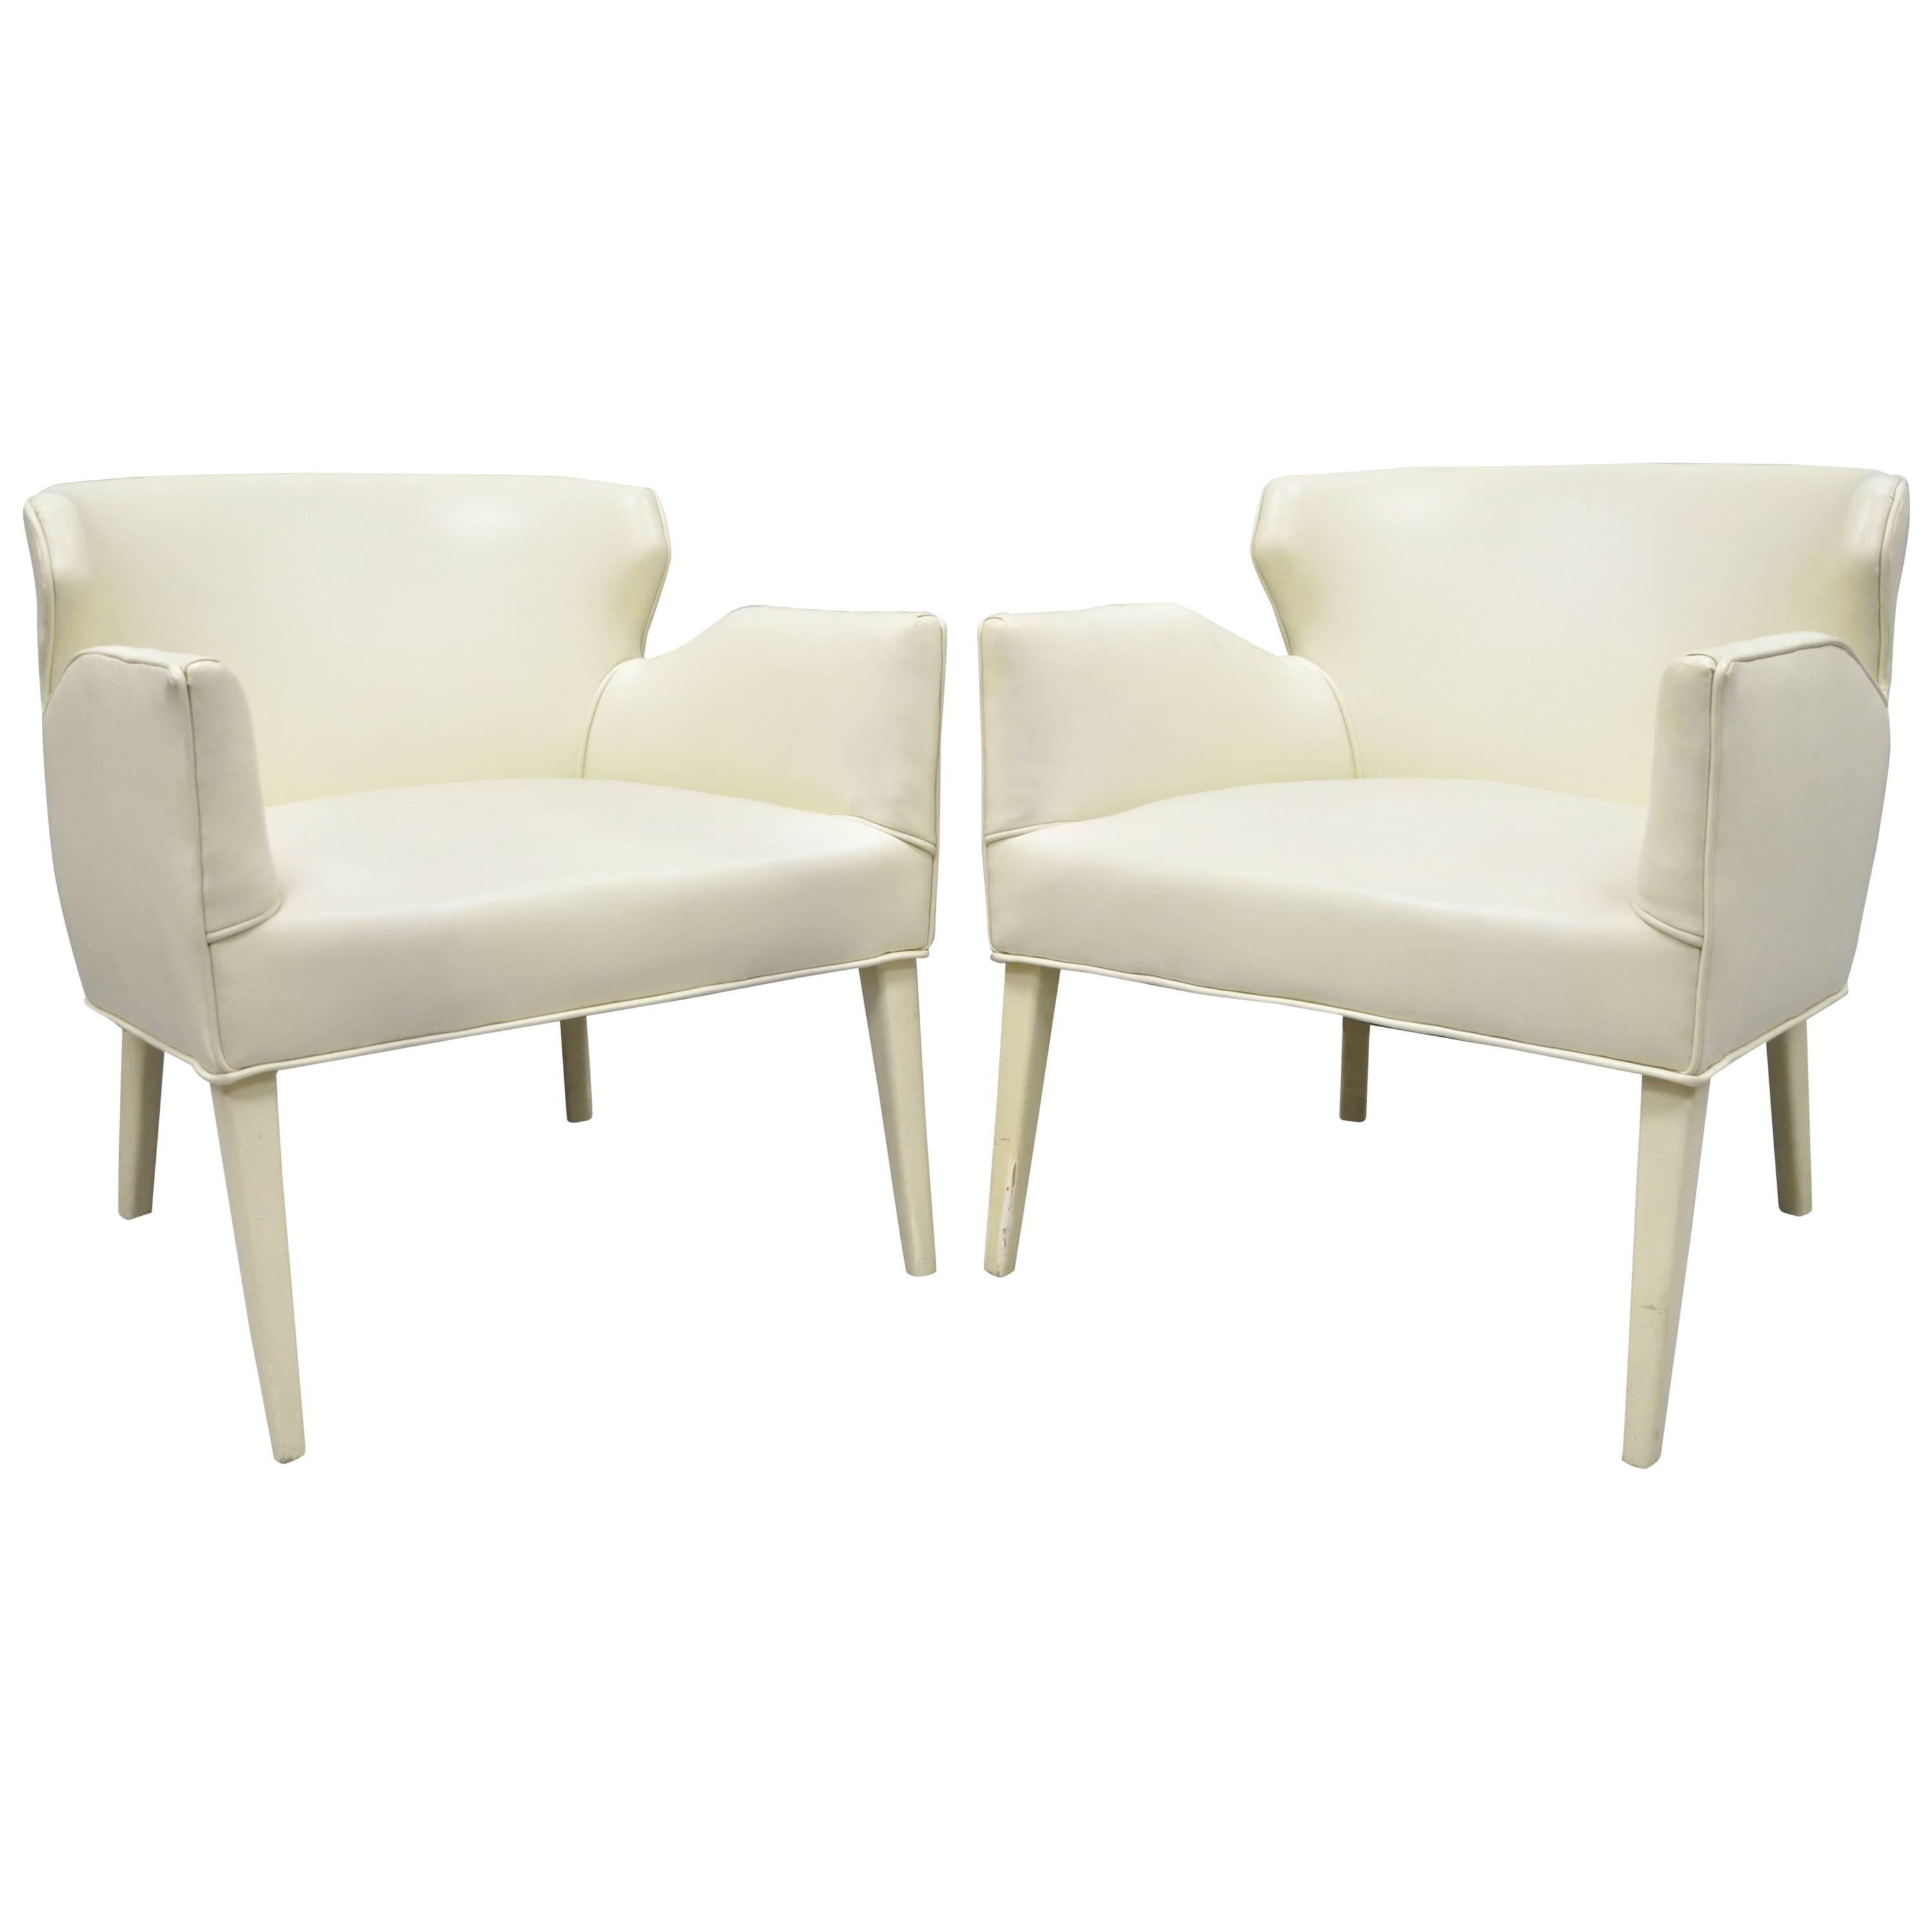 Pair of Barrel Back Sculptural Off-White Vinyl Lounge Chairs After Paul McCobb